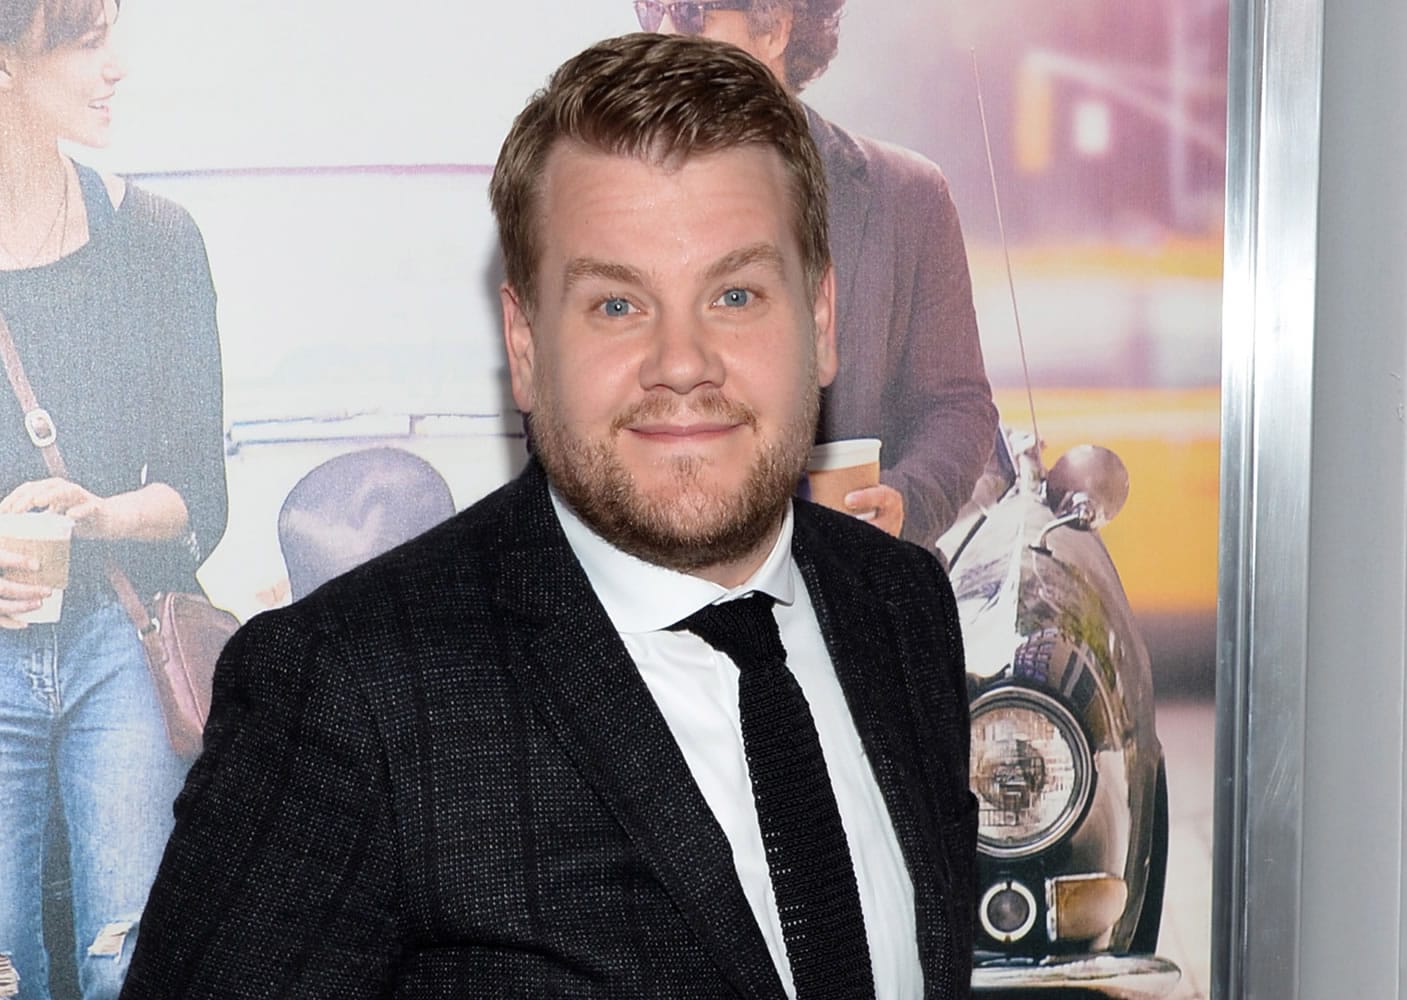 Invision files
CBS has set March 23 for the debut of James Corden as host of &quot;The Late Late Show.&quot; Corden is replacing Craig Ferguson, who after a decade in the host chair exited Dec. 18. The show will continue to originate from Los Angeles.